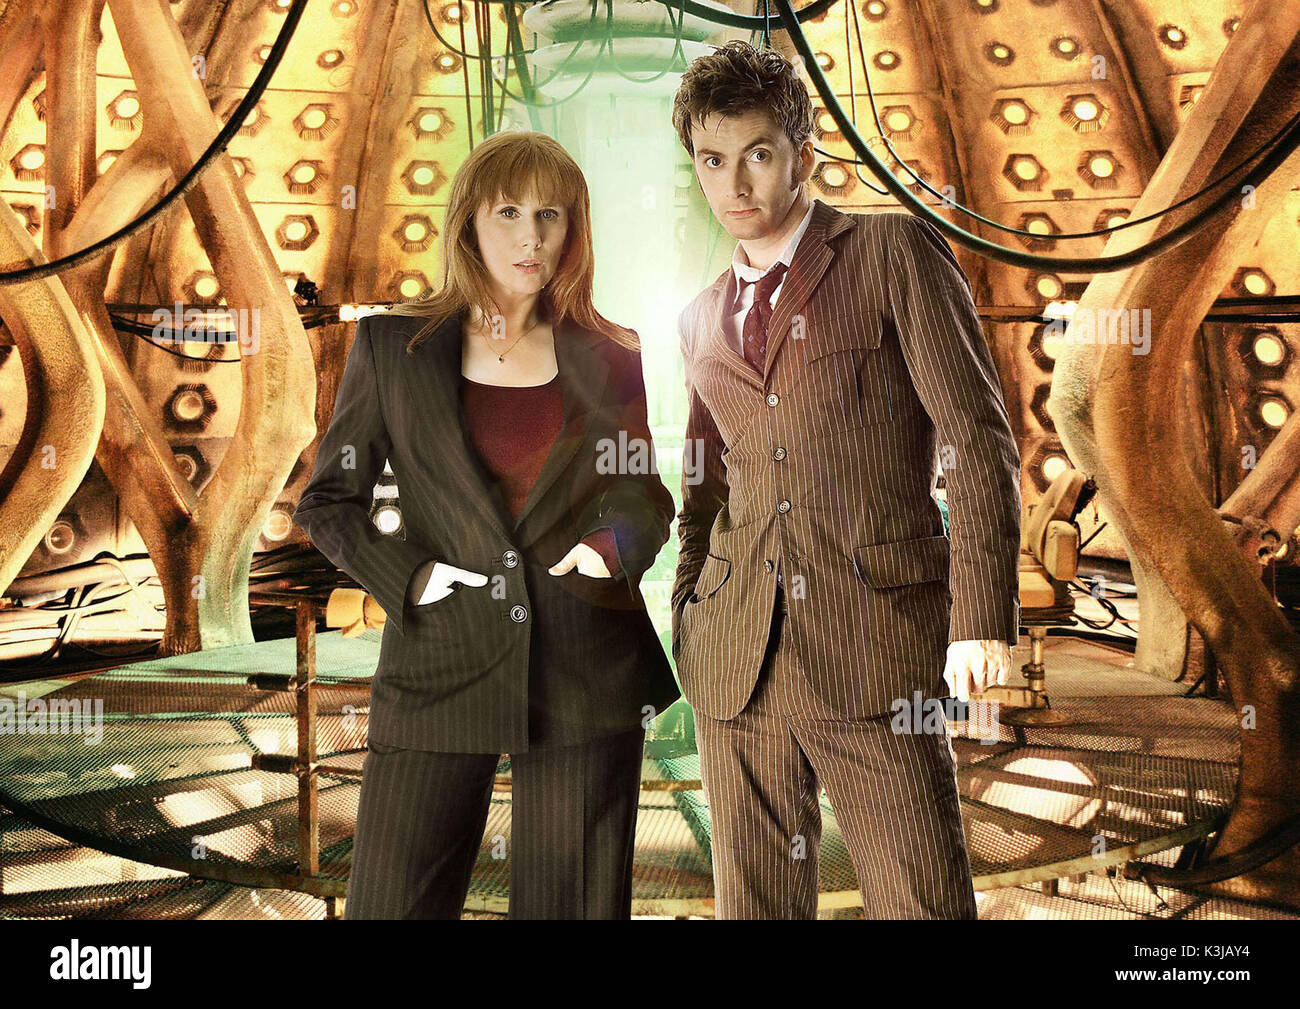 DOCTOR WHO CATHERINE TATE as Donna, DAVID TENNANT as The Doctor. Episode 1 DOCTOR  WHO Date: 2008 Stock Photo - Alamy